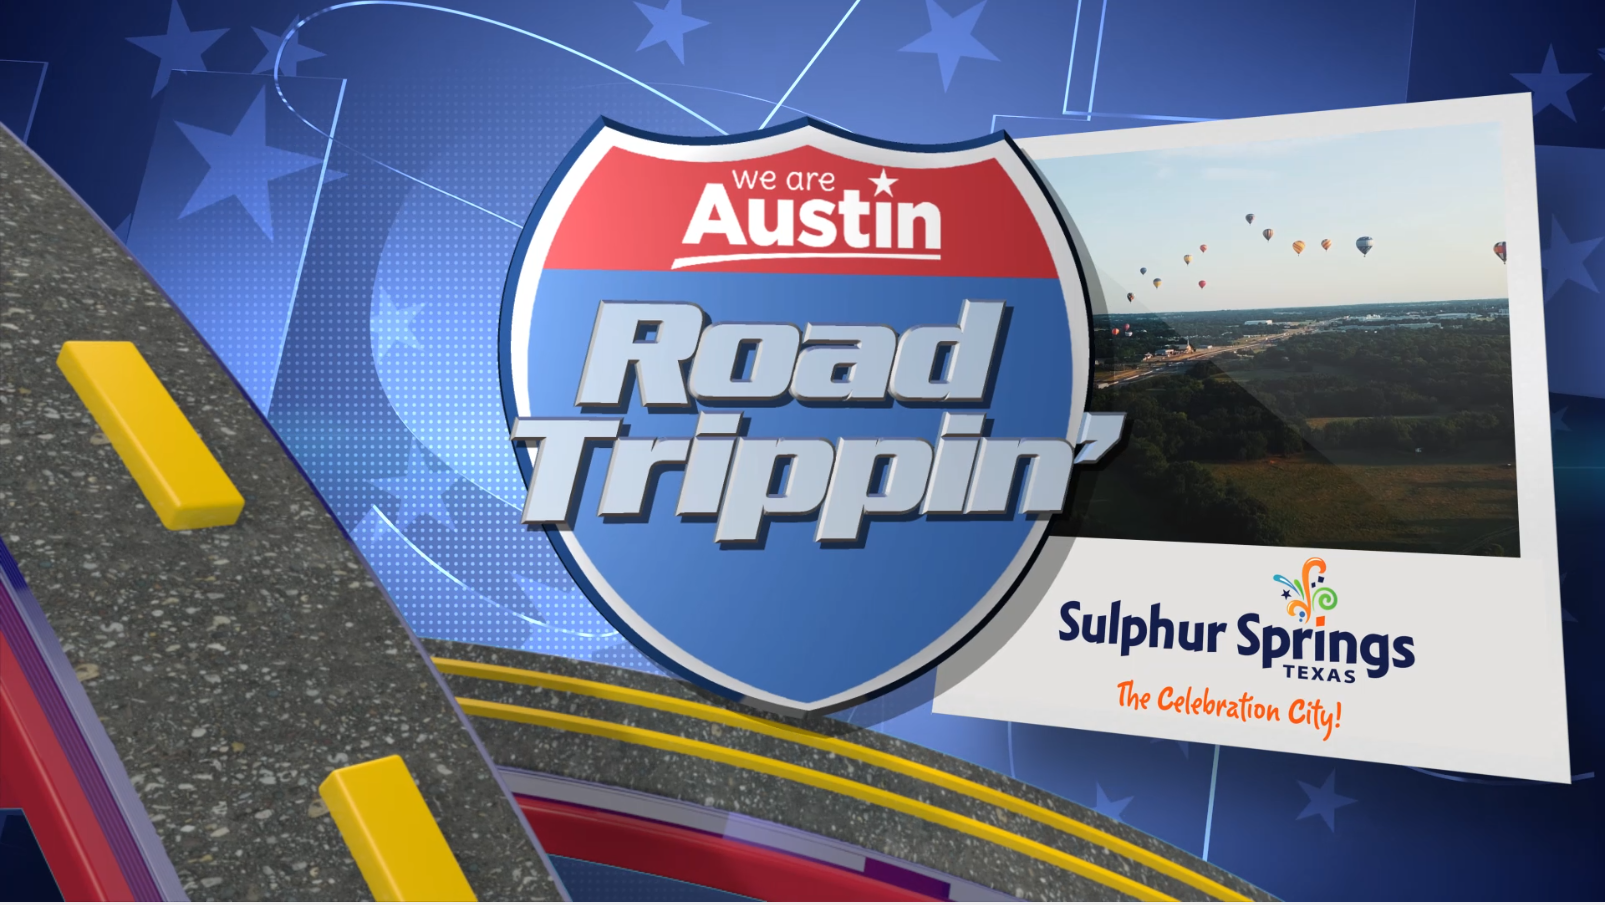 CBS Austin to Air “Road Trippin'” Episode About Sulphur Springs On Tuesday